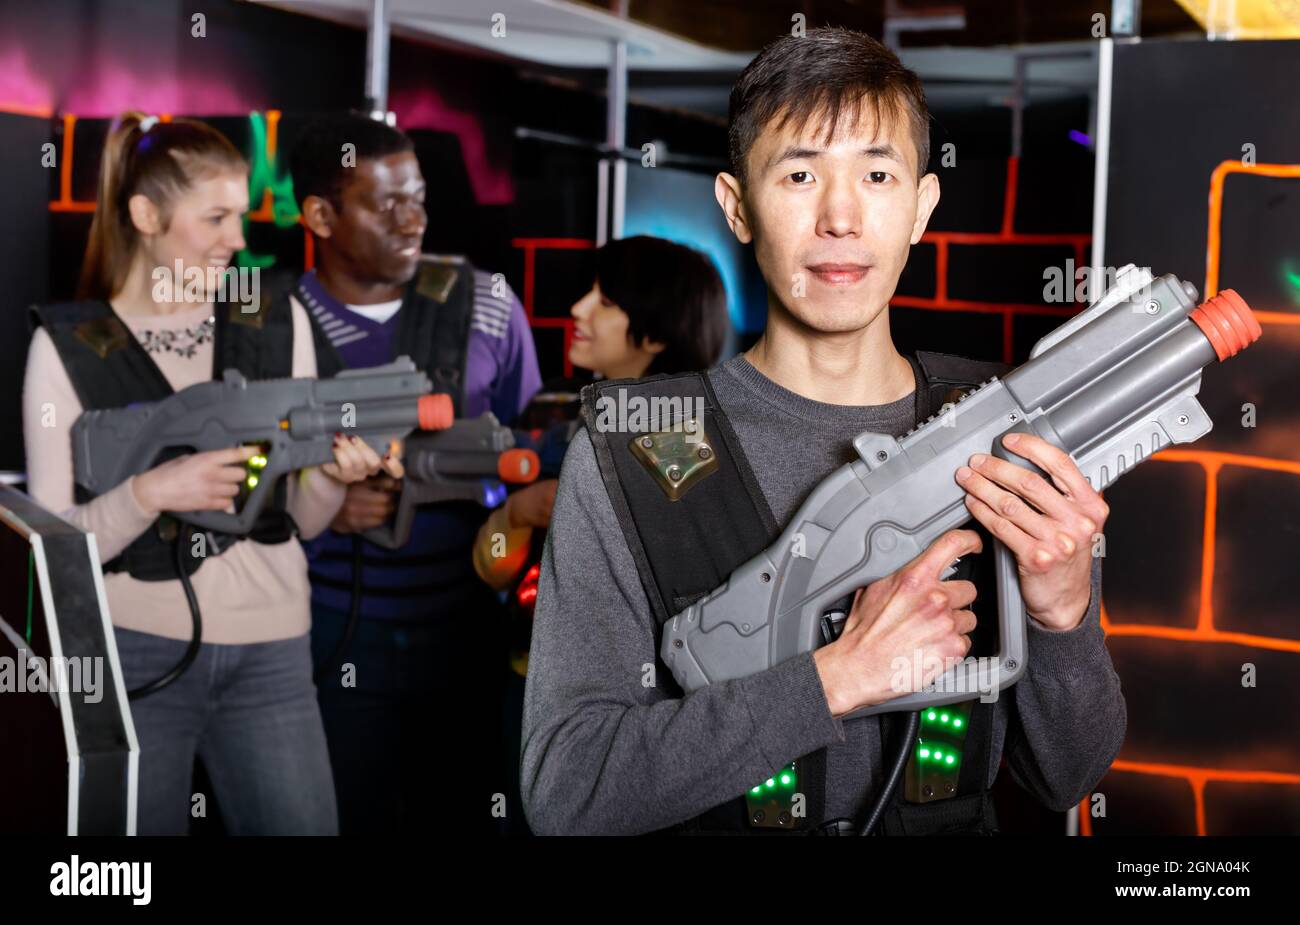 Asian man with laser gun ready for lasertag game Stock Photo - Alamy